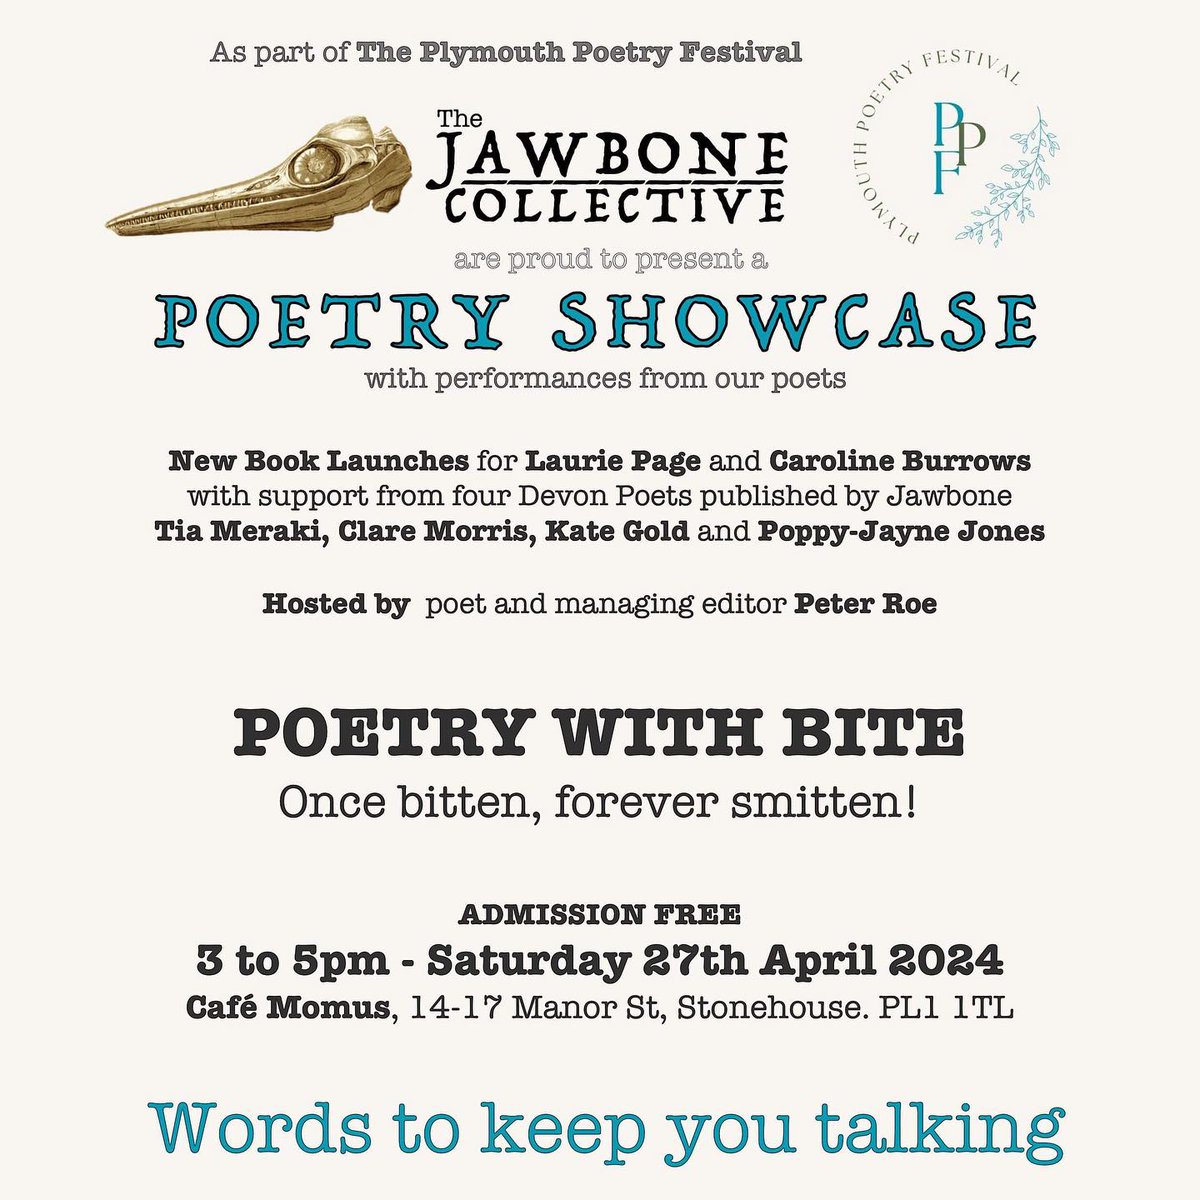 #ThisSaturday 27th April 3-5pm. Plymouth Poetry Festival! The @jawbonecollective showcase at Cafe Momus with: me reading my Verse Cyces; Laurie Page, Clare Morris @tia_meraki, Poppy Jane Mae, @kategoldartist, hosted by Sir Peter Roe. #plymouthpoetryfestival #indiepoetry